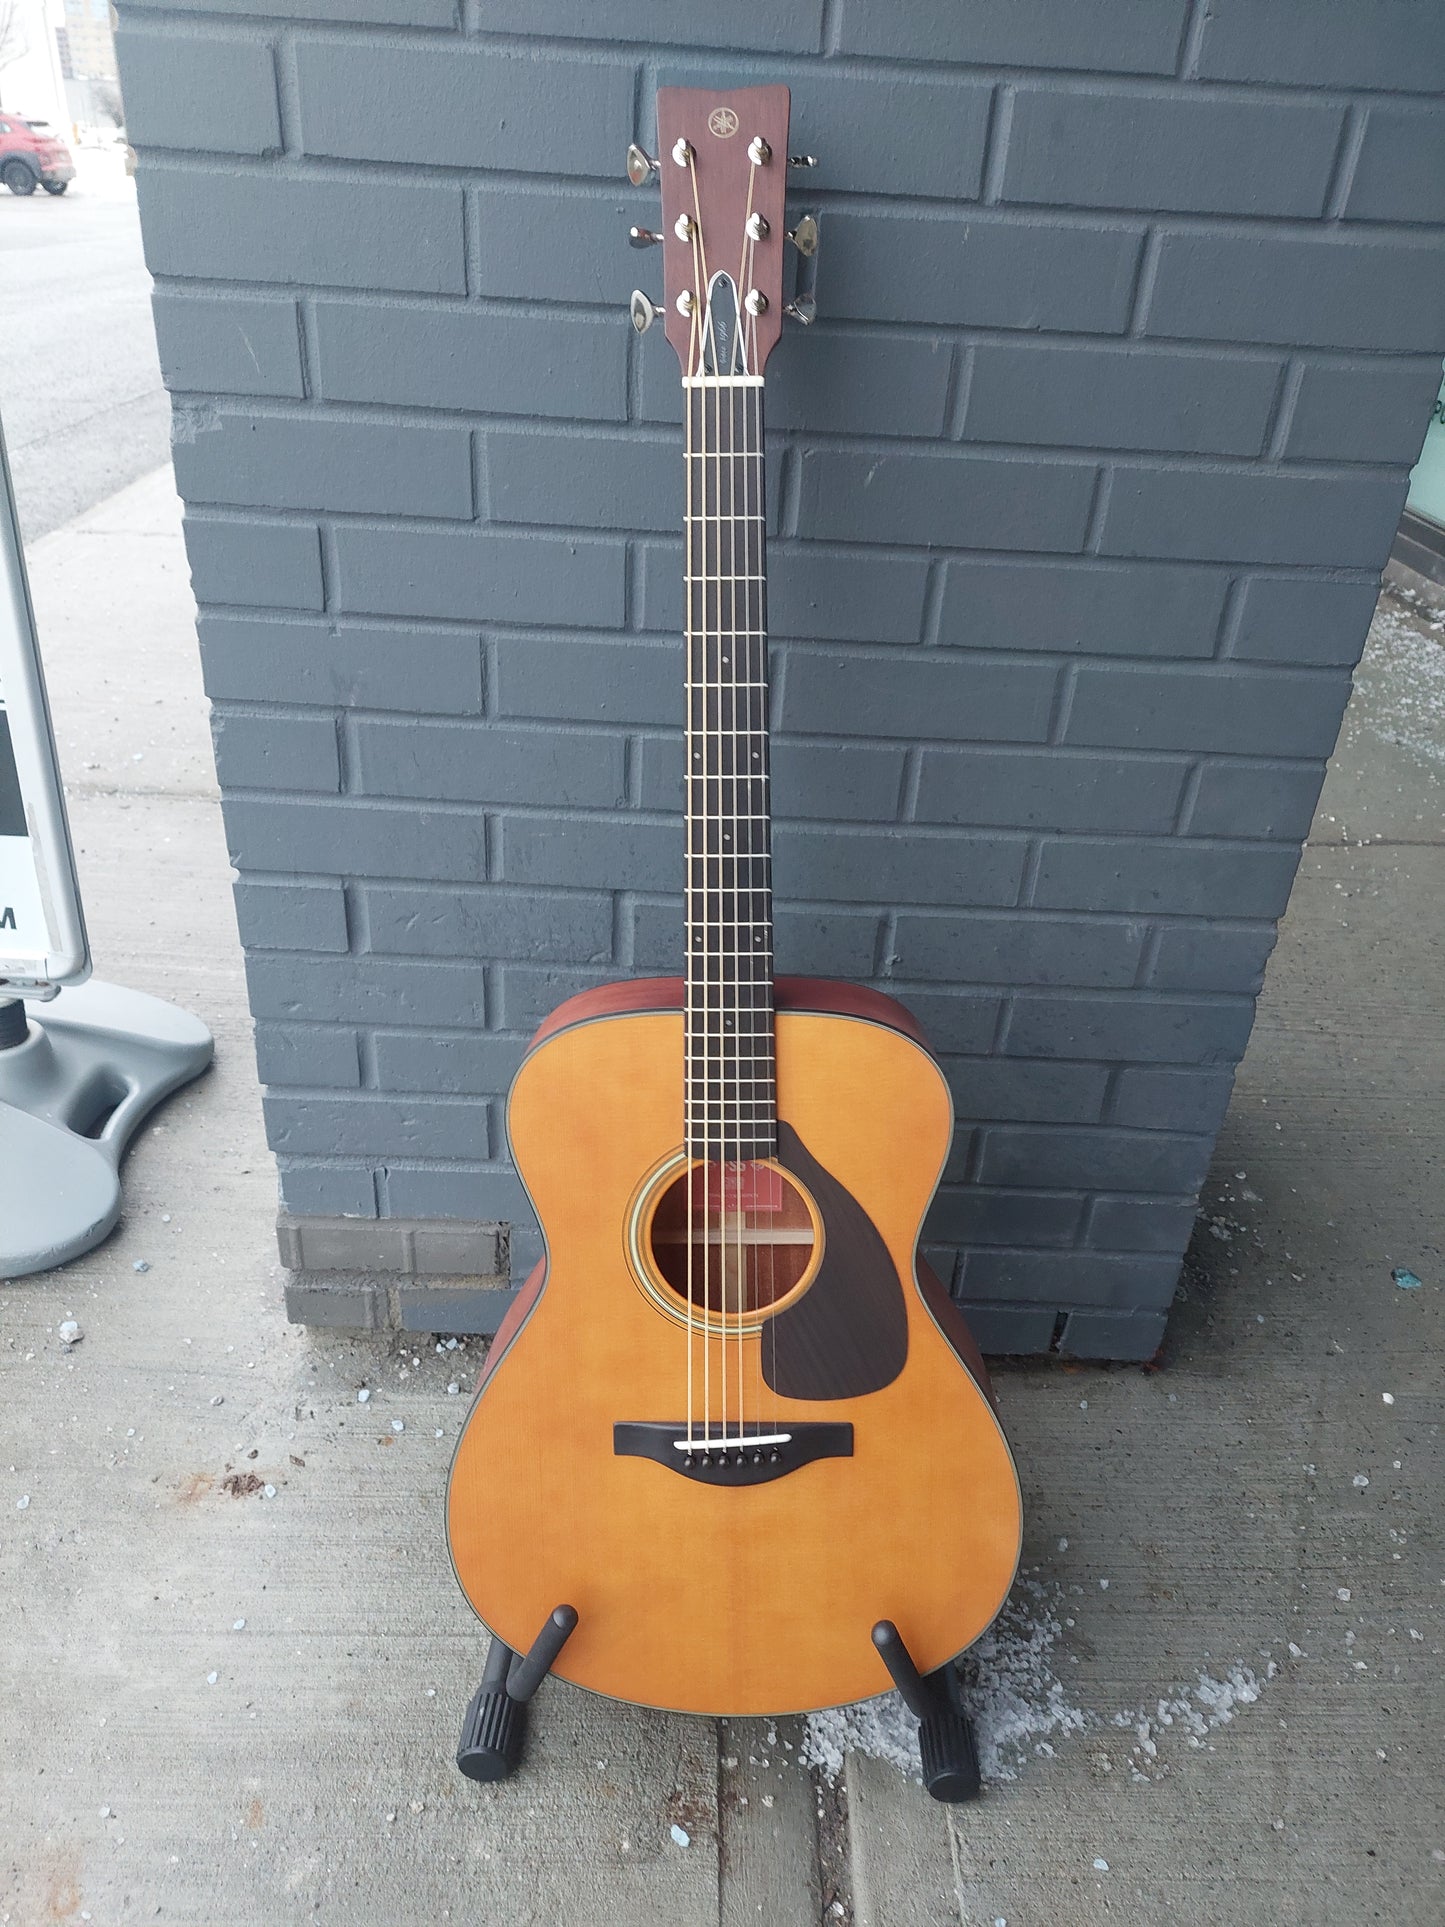 Yamaha FS5 60's All Solid Spruce/Mahogany Acoustic Guitar